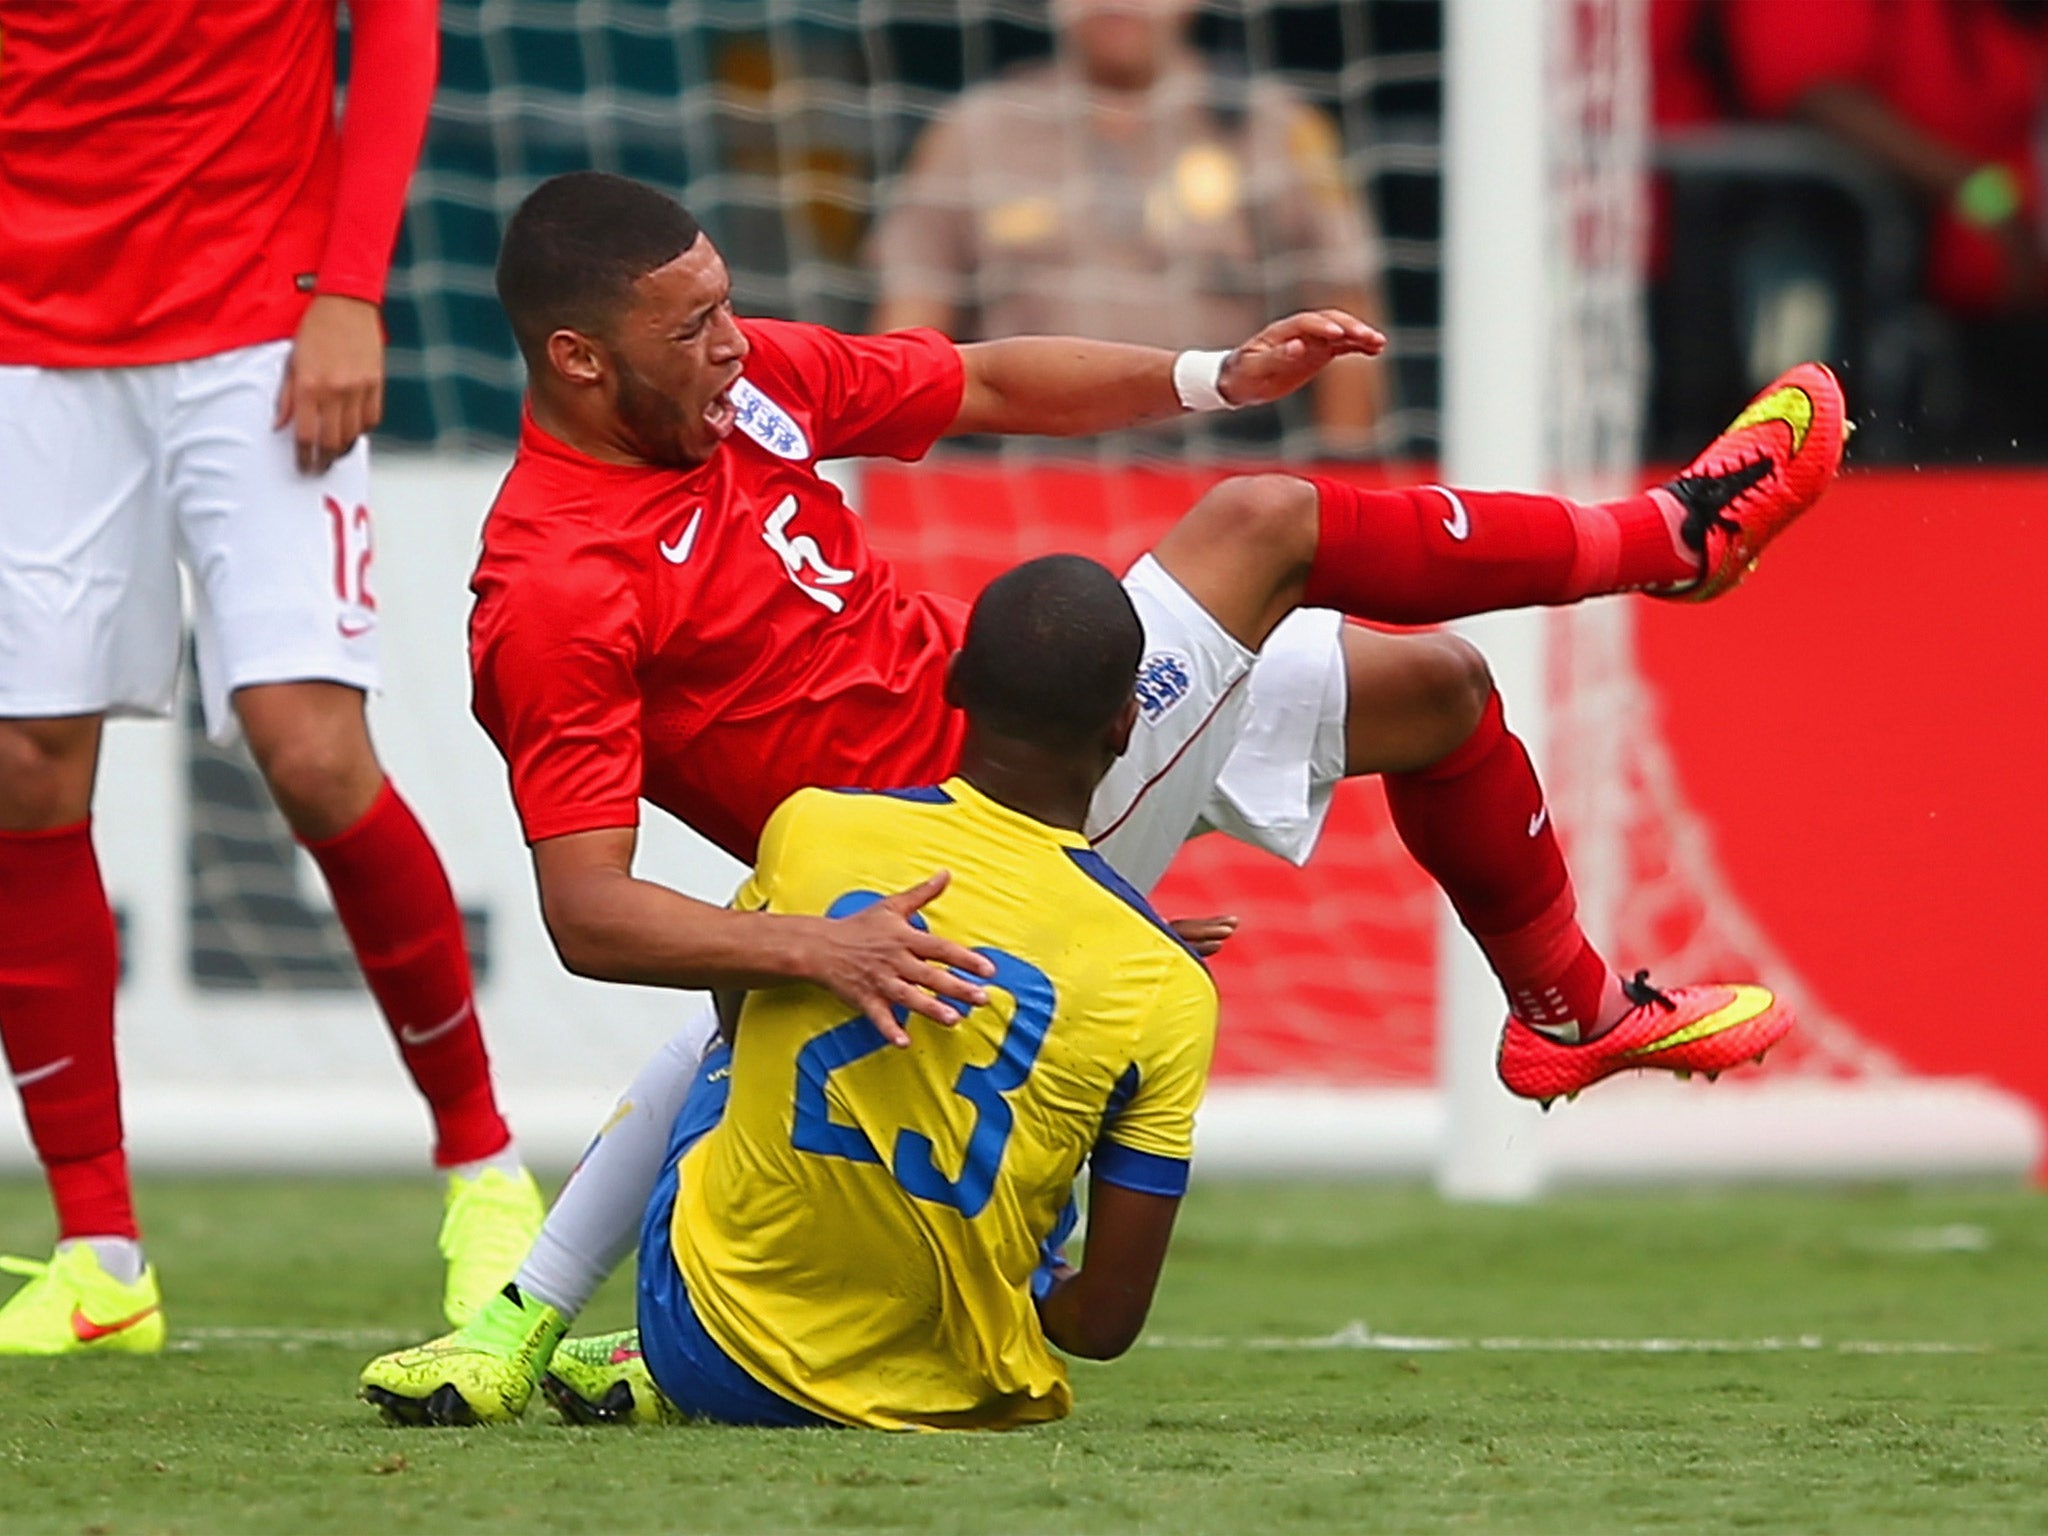 Alex Oxlade-Chamberlain goes down in pain under a challenge from Carlos Gruezo